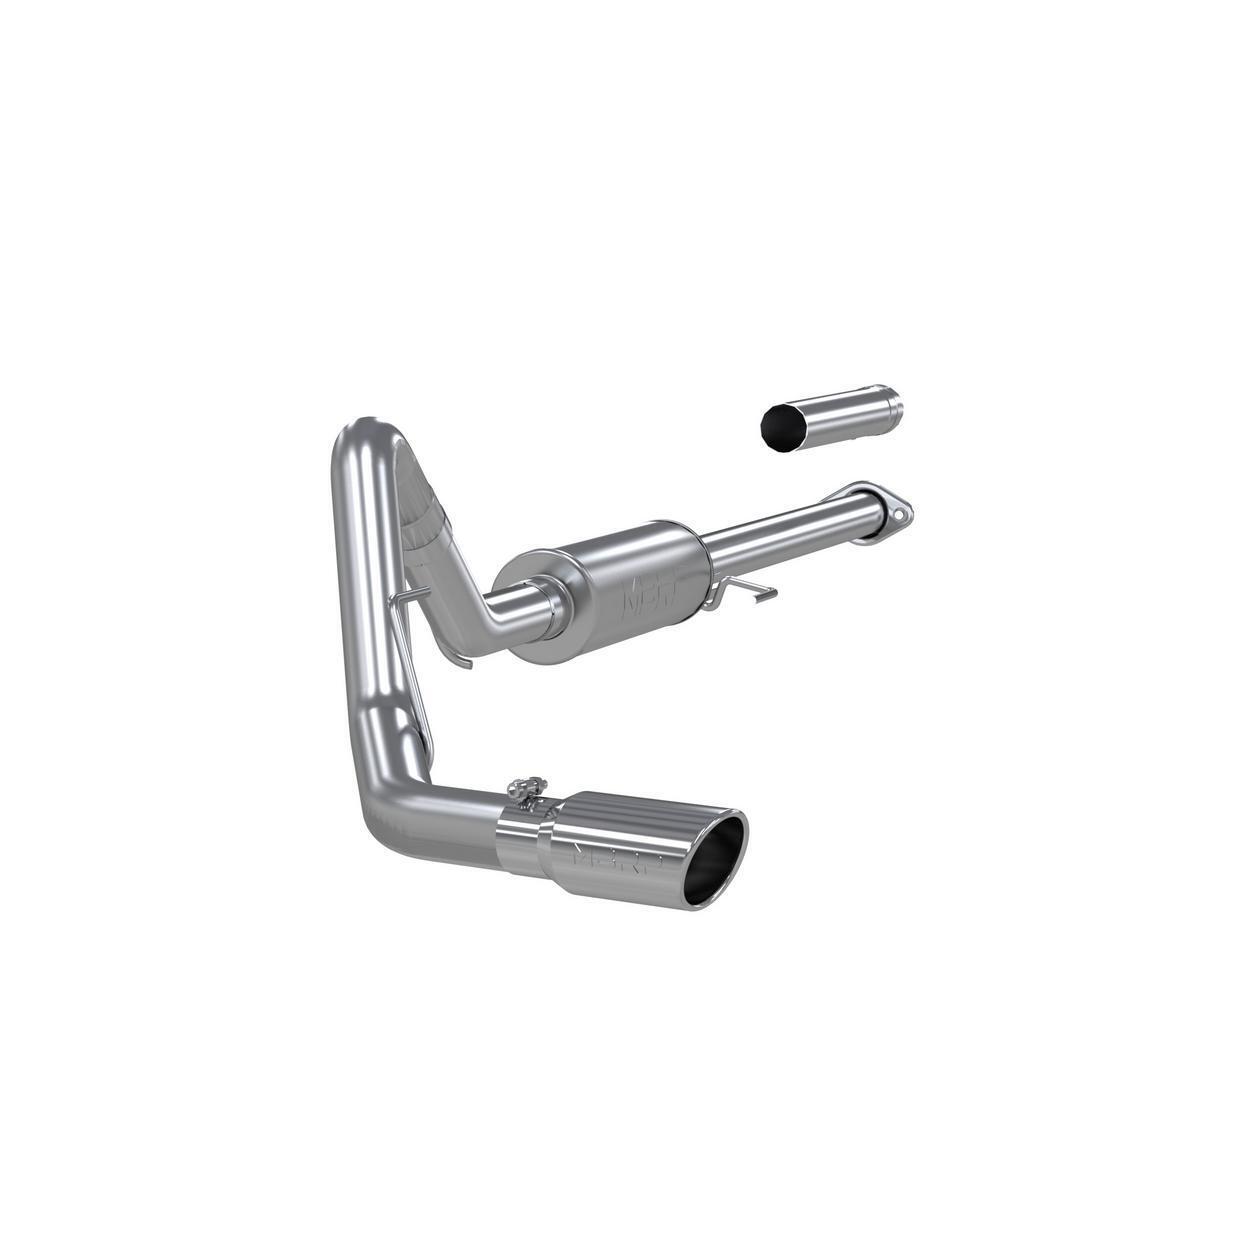 MBRP Exhaust S5253AL-VT Exhaust System Kit for 2018 Ford F-150